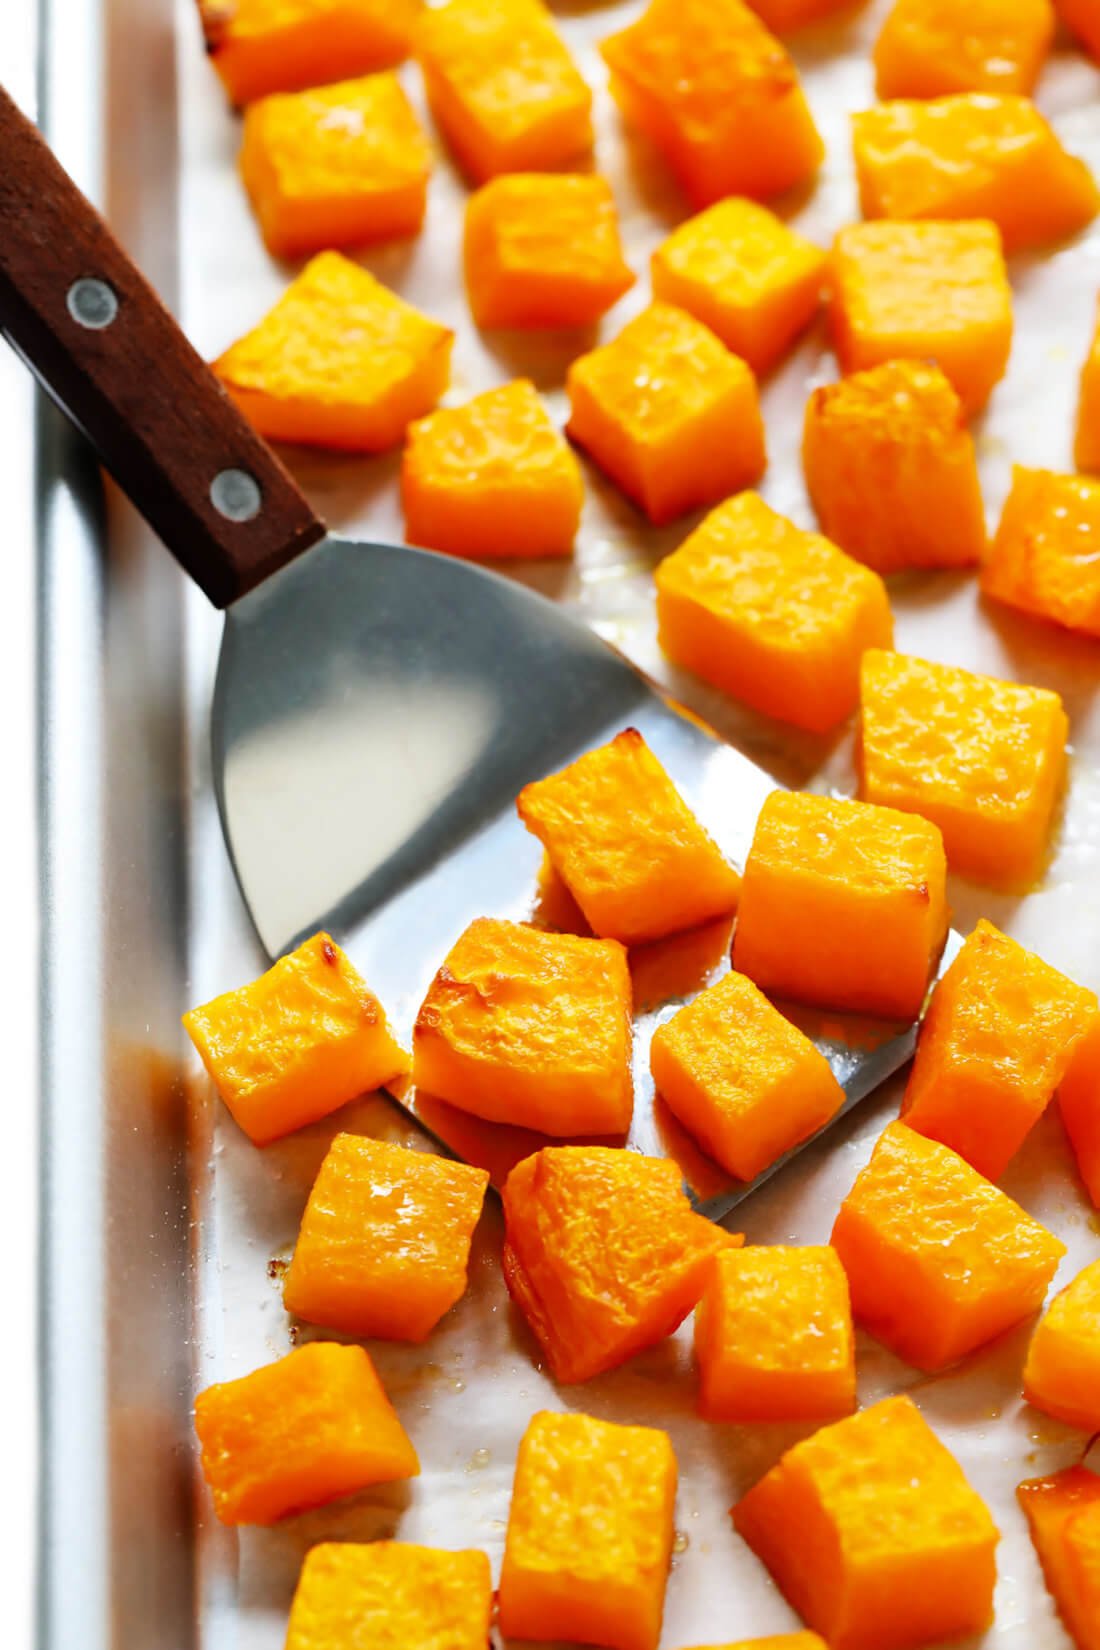 How To Roast Butternut Squash (Diced or Halved)